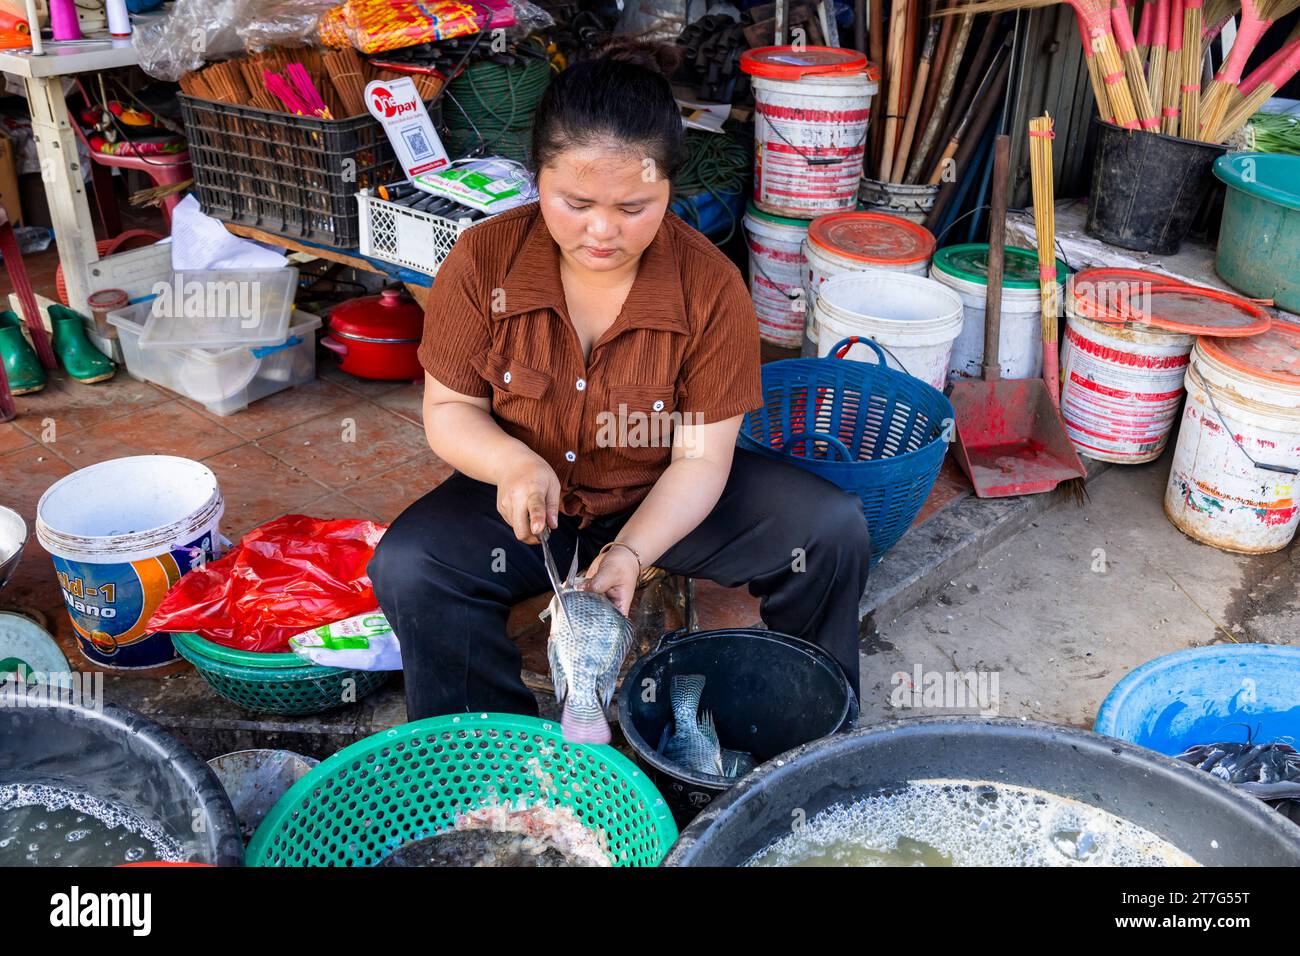 Street of central market, woman selling fishes, Phonsavan, Xiangkhouang province, Laos, Southeast Asia, Asia Stock Photo